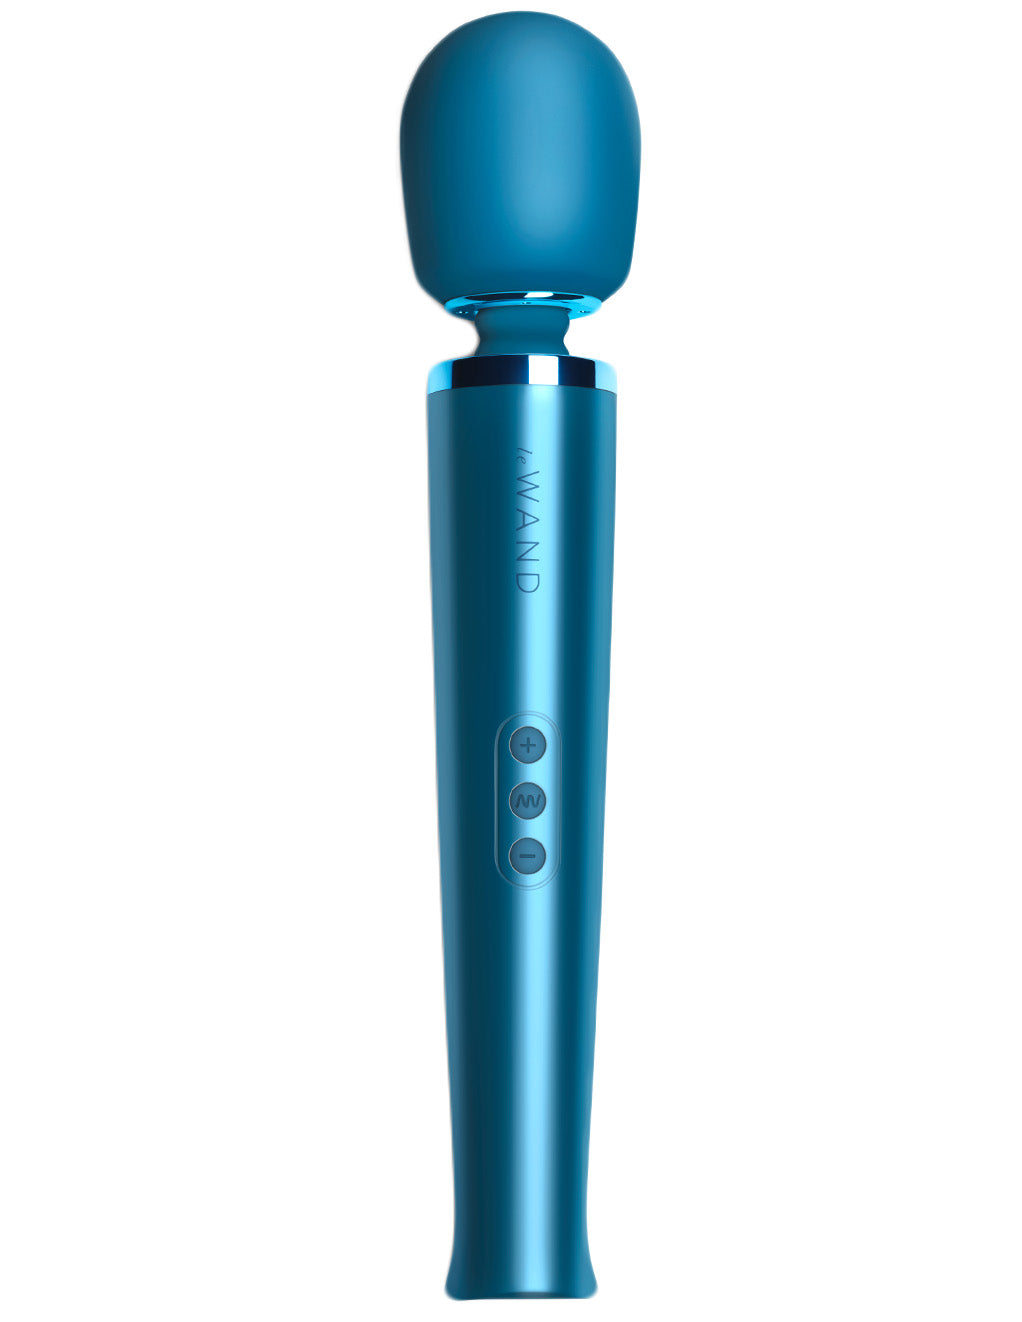 Le Wand Original Wand Massager- Pacific Blue- Front